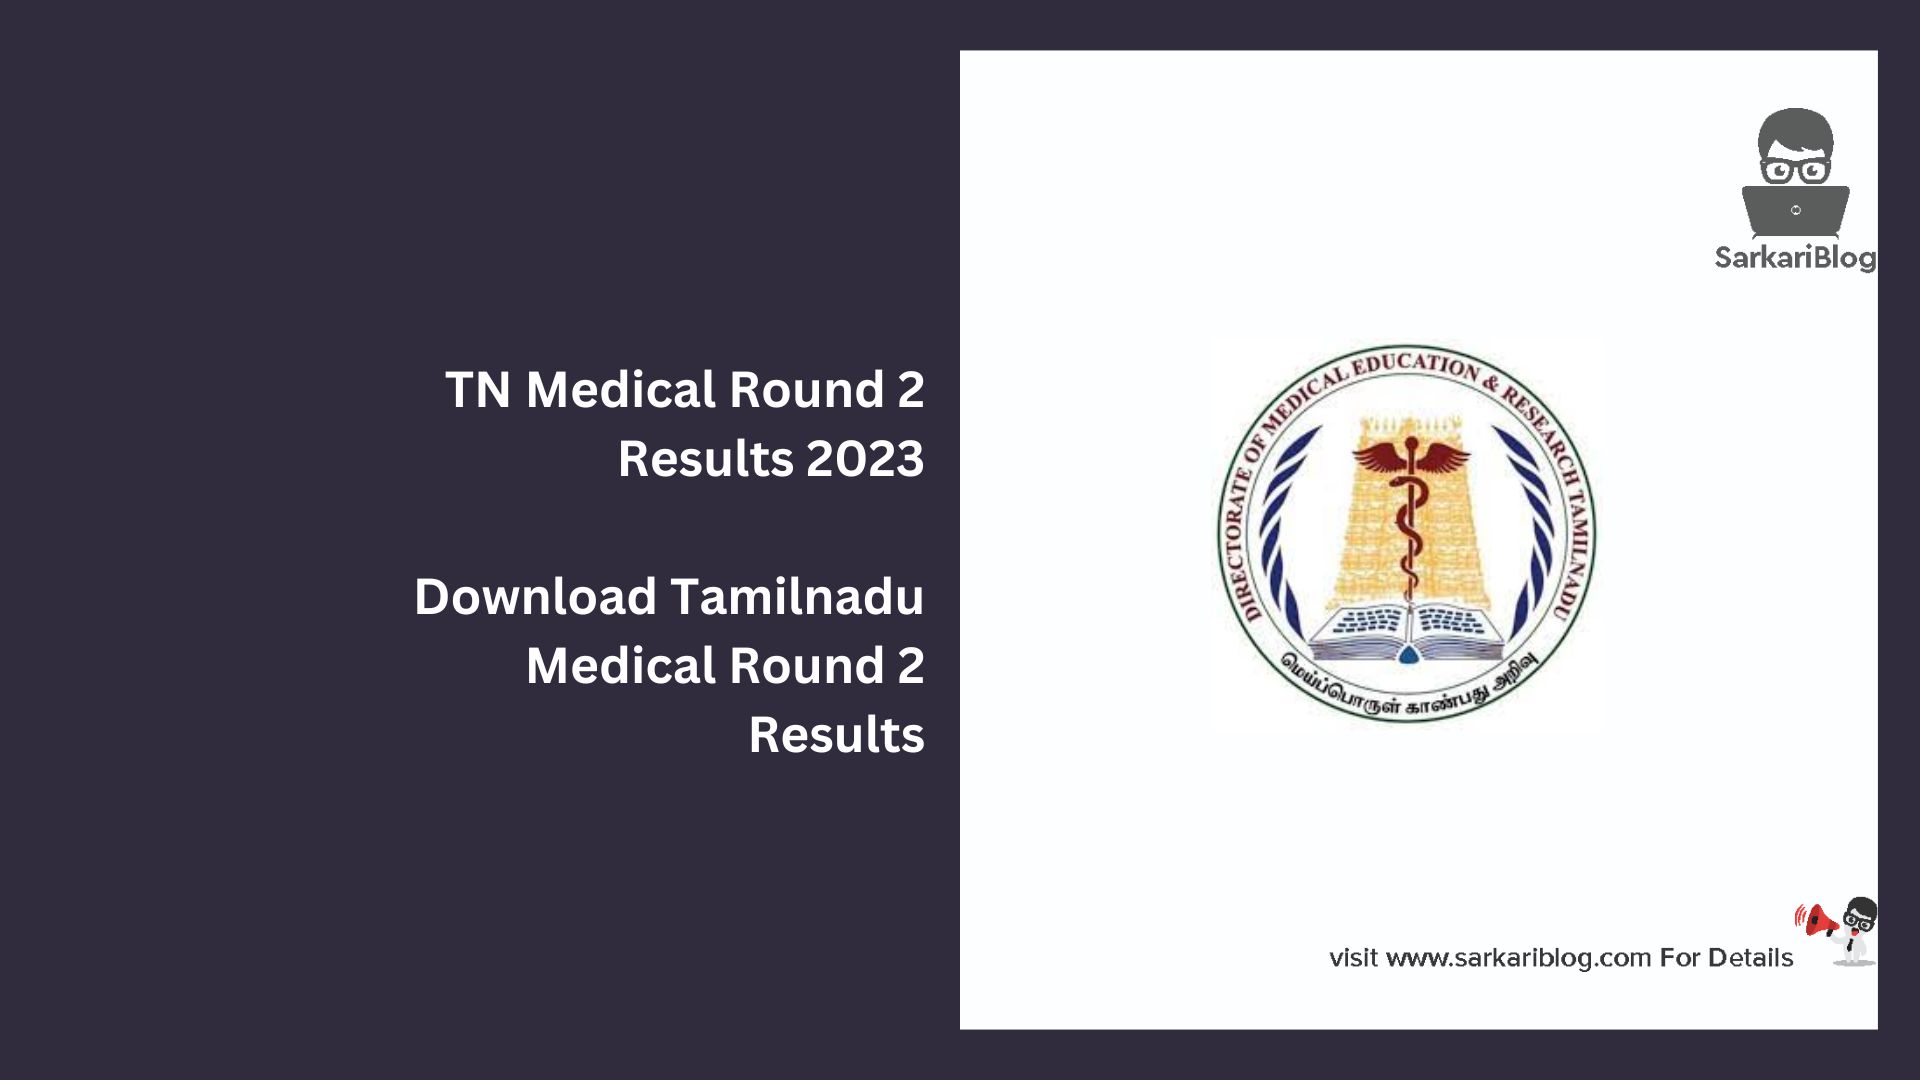 TN Medical Round 2 Results 2023